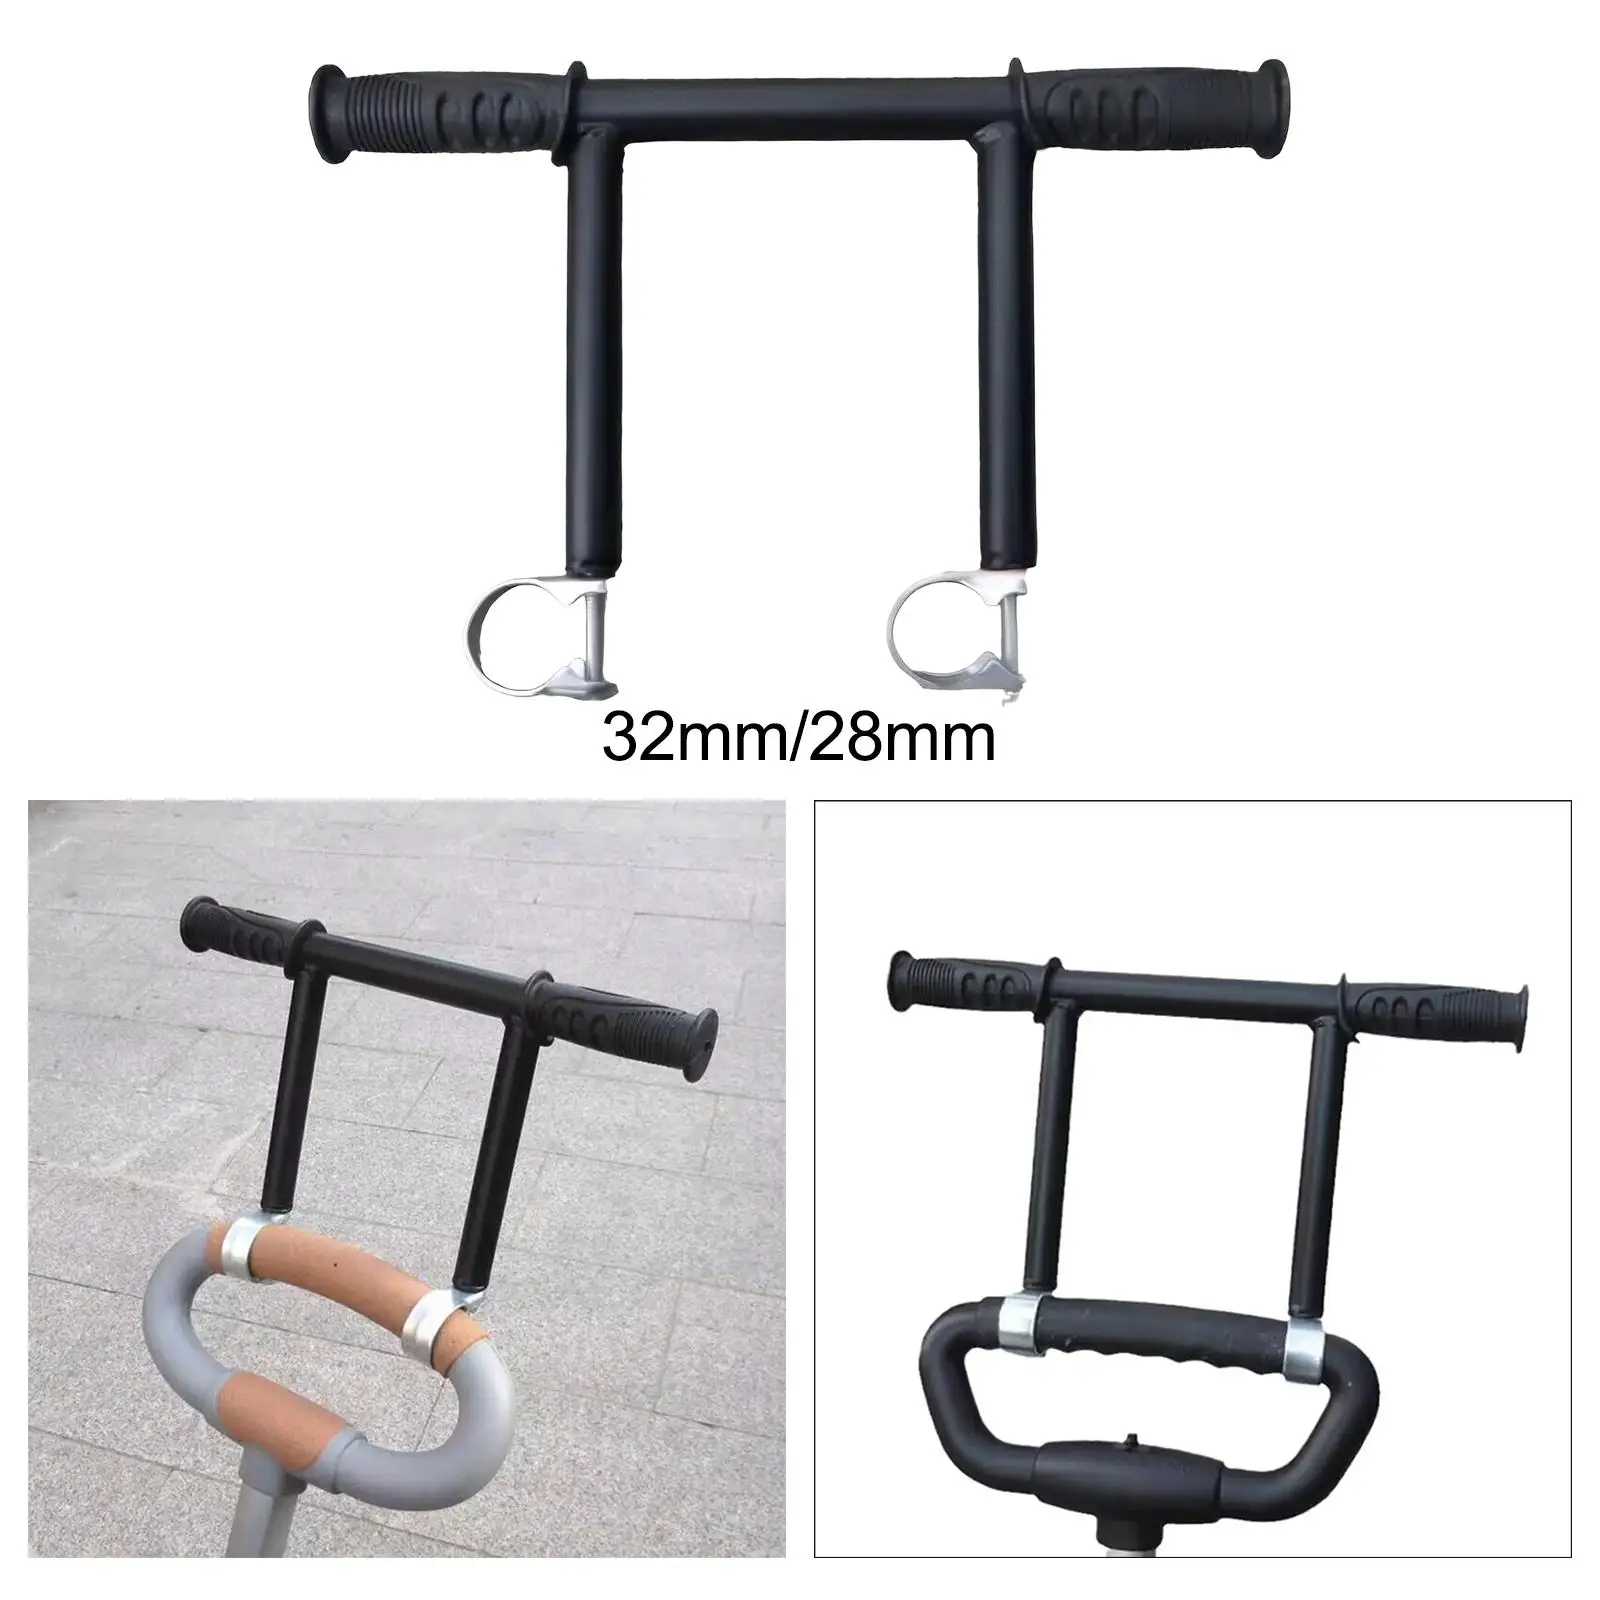 Metal Easy to Install Durable Sturdy Stroller Handle Extender for Pram Trolley Baby Stroller Carriage Pushchair Accessory